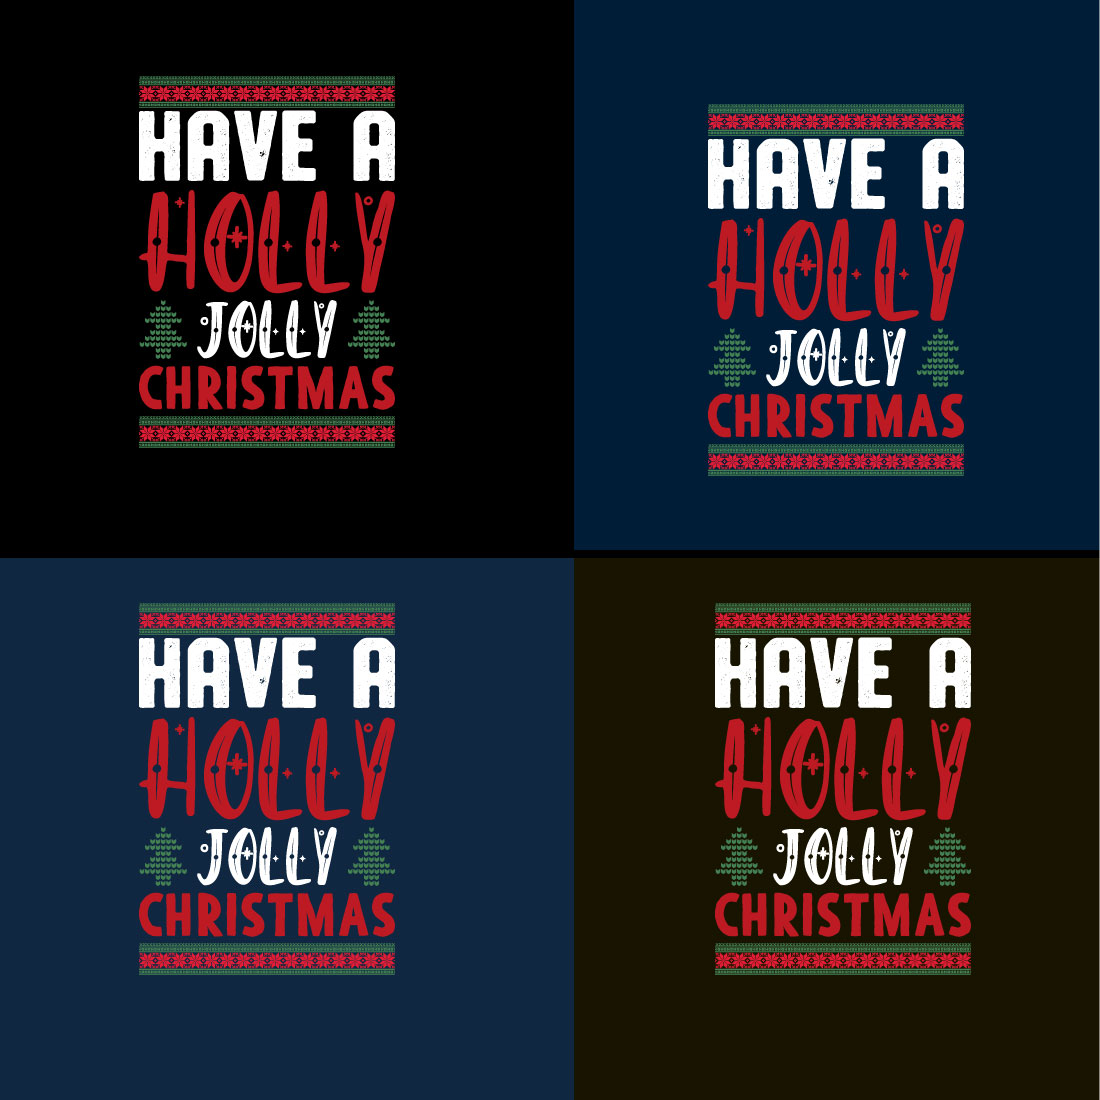 Have a Holly-Jolly Christmas T-shirt Design cover image.